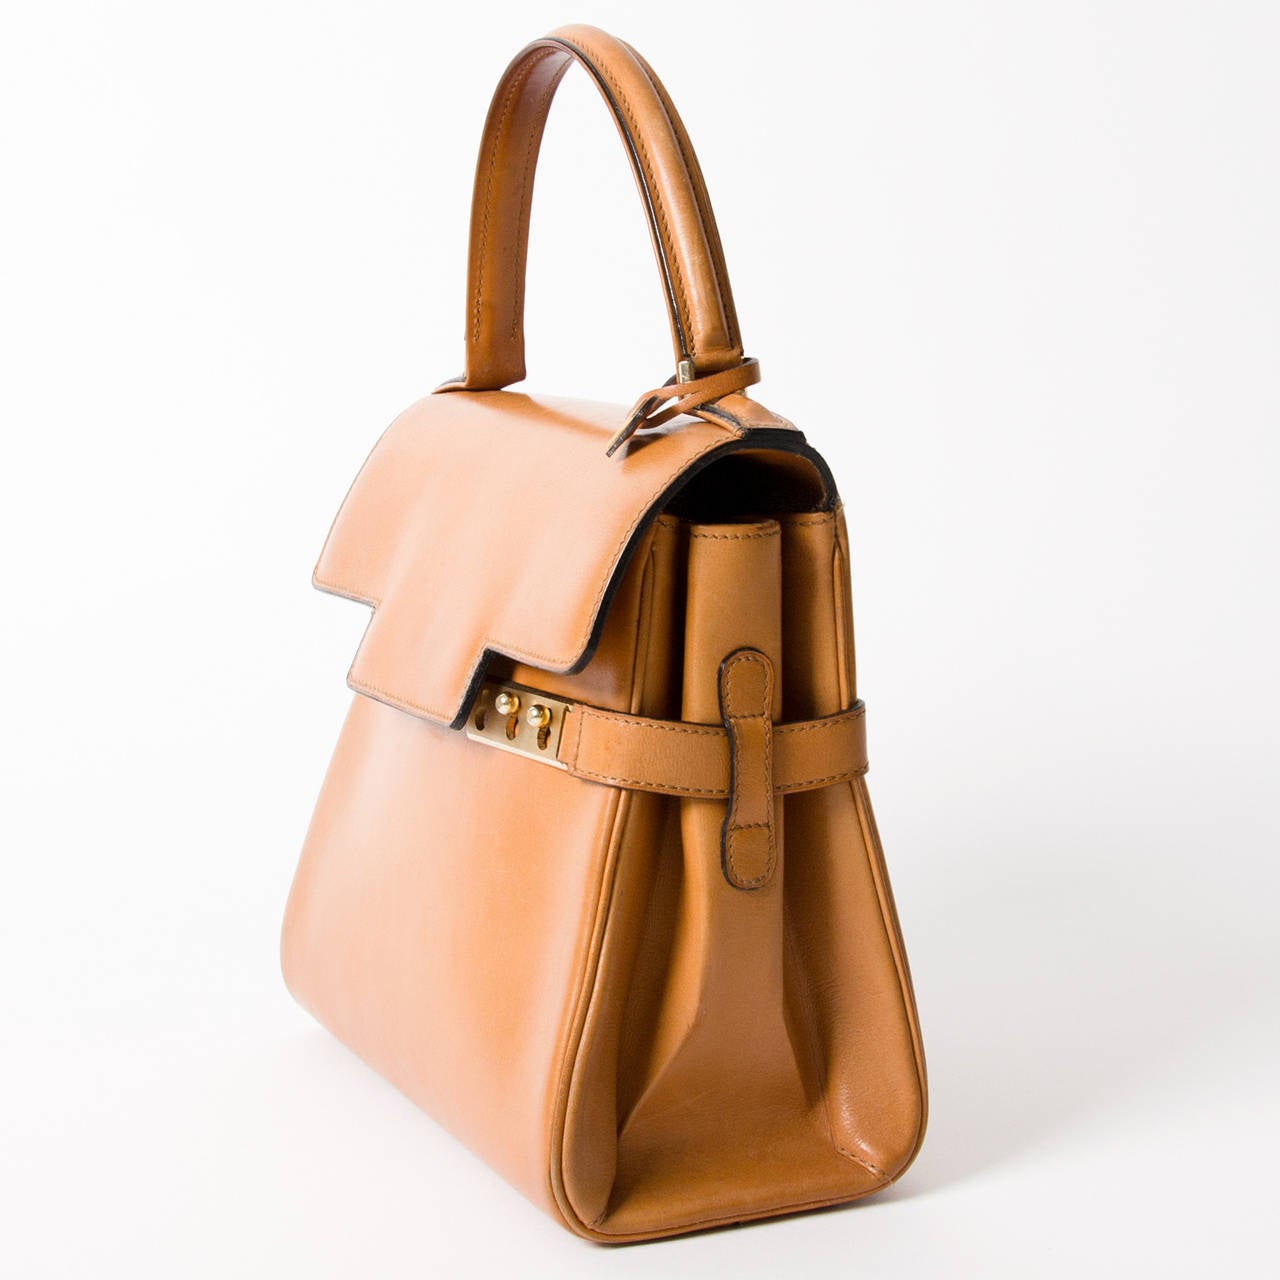 Vintage Delvaux Tempête cognac bag with gold hardware. With its statement hardware and geometric shape, this beauty is one of Delvaux's most architectural bags. 
Comes with Delvaux authenticity card.